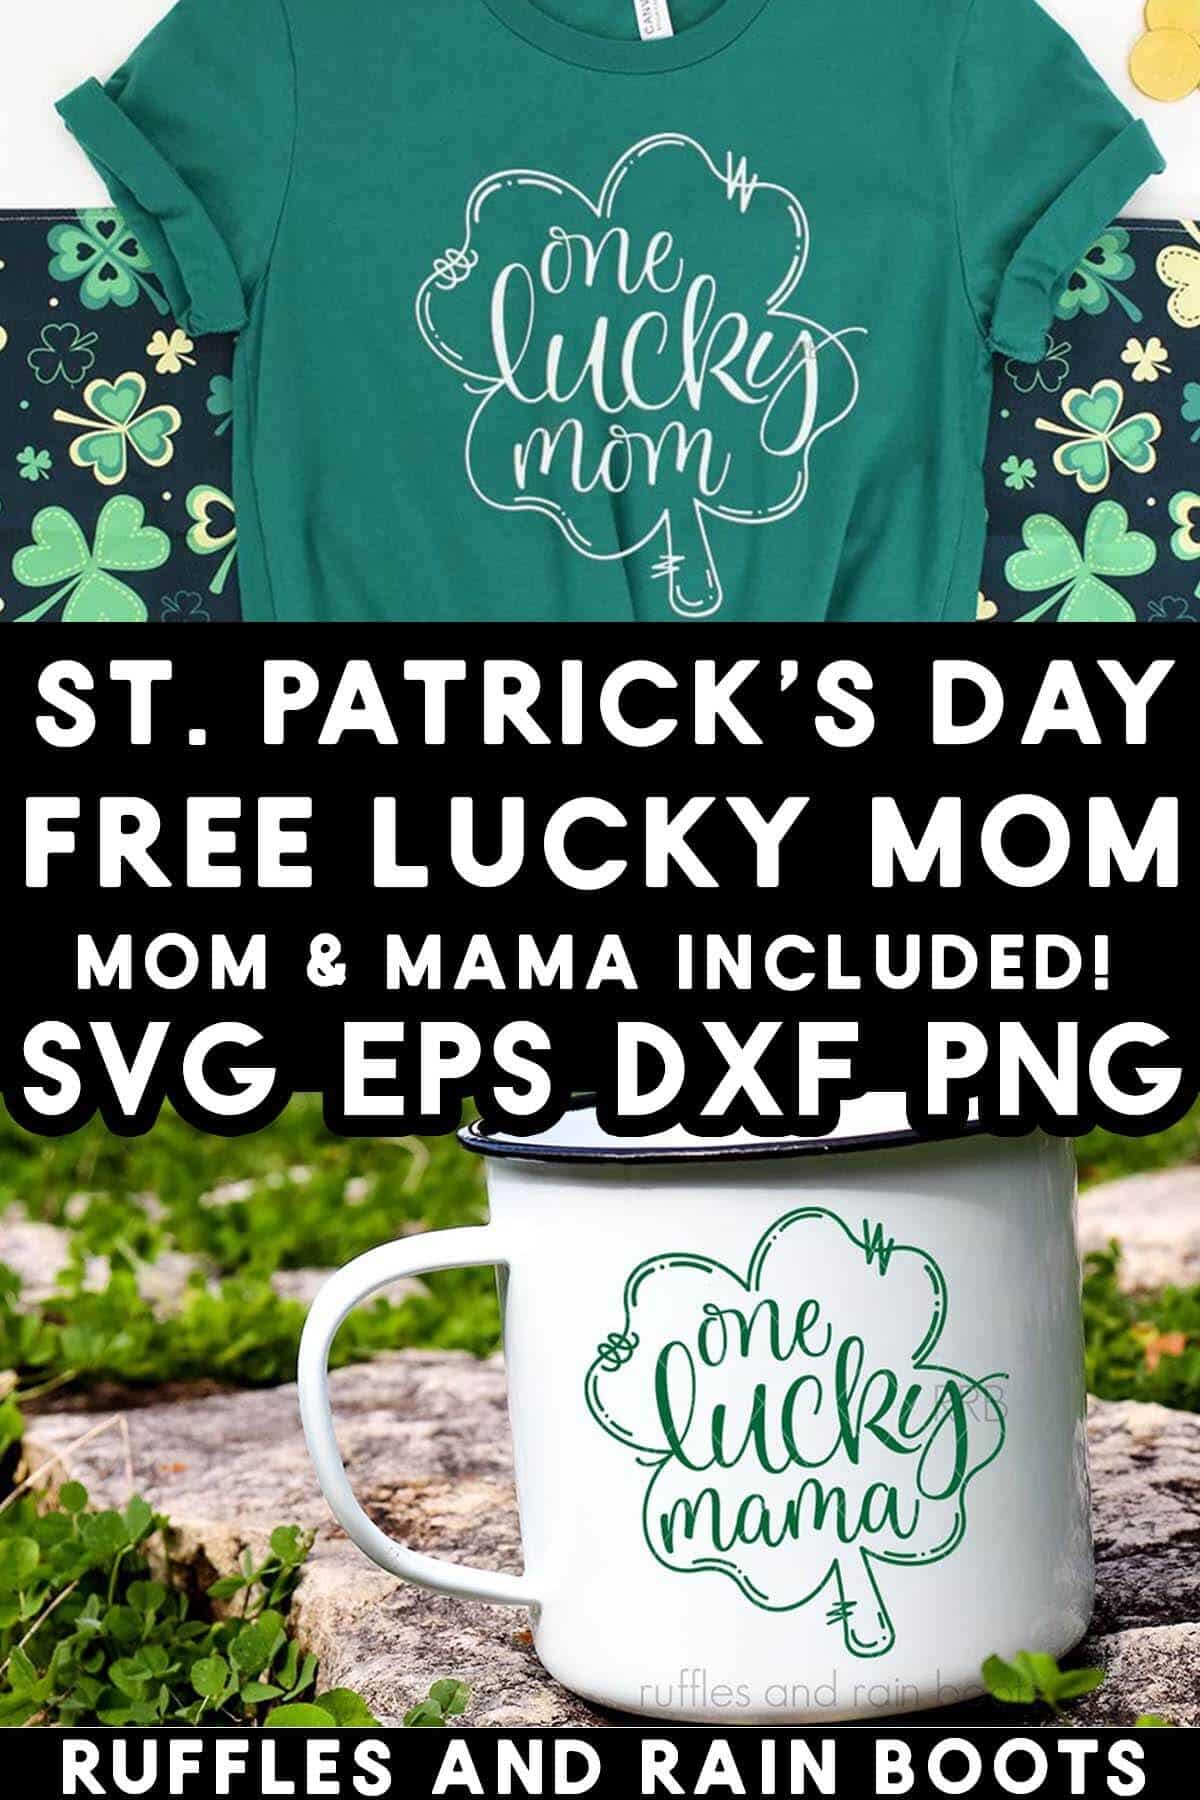 A green t-shirt which reads one lucky mom and a white cup which reads one lucky mama from Ruffles and Rain Boots free SVG.